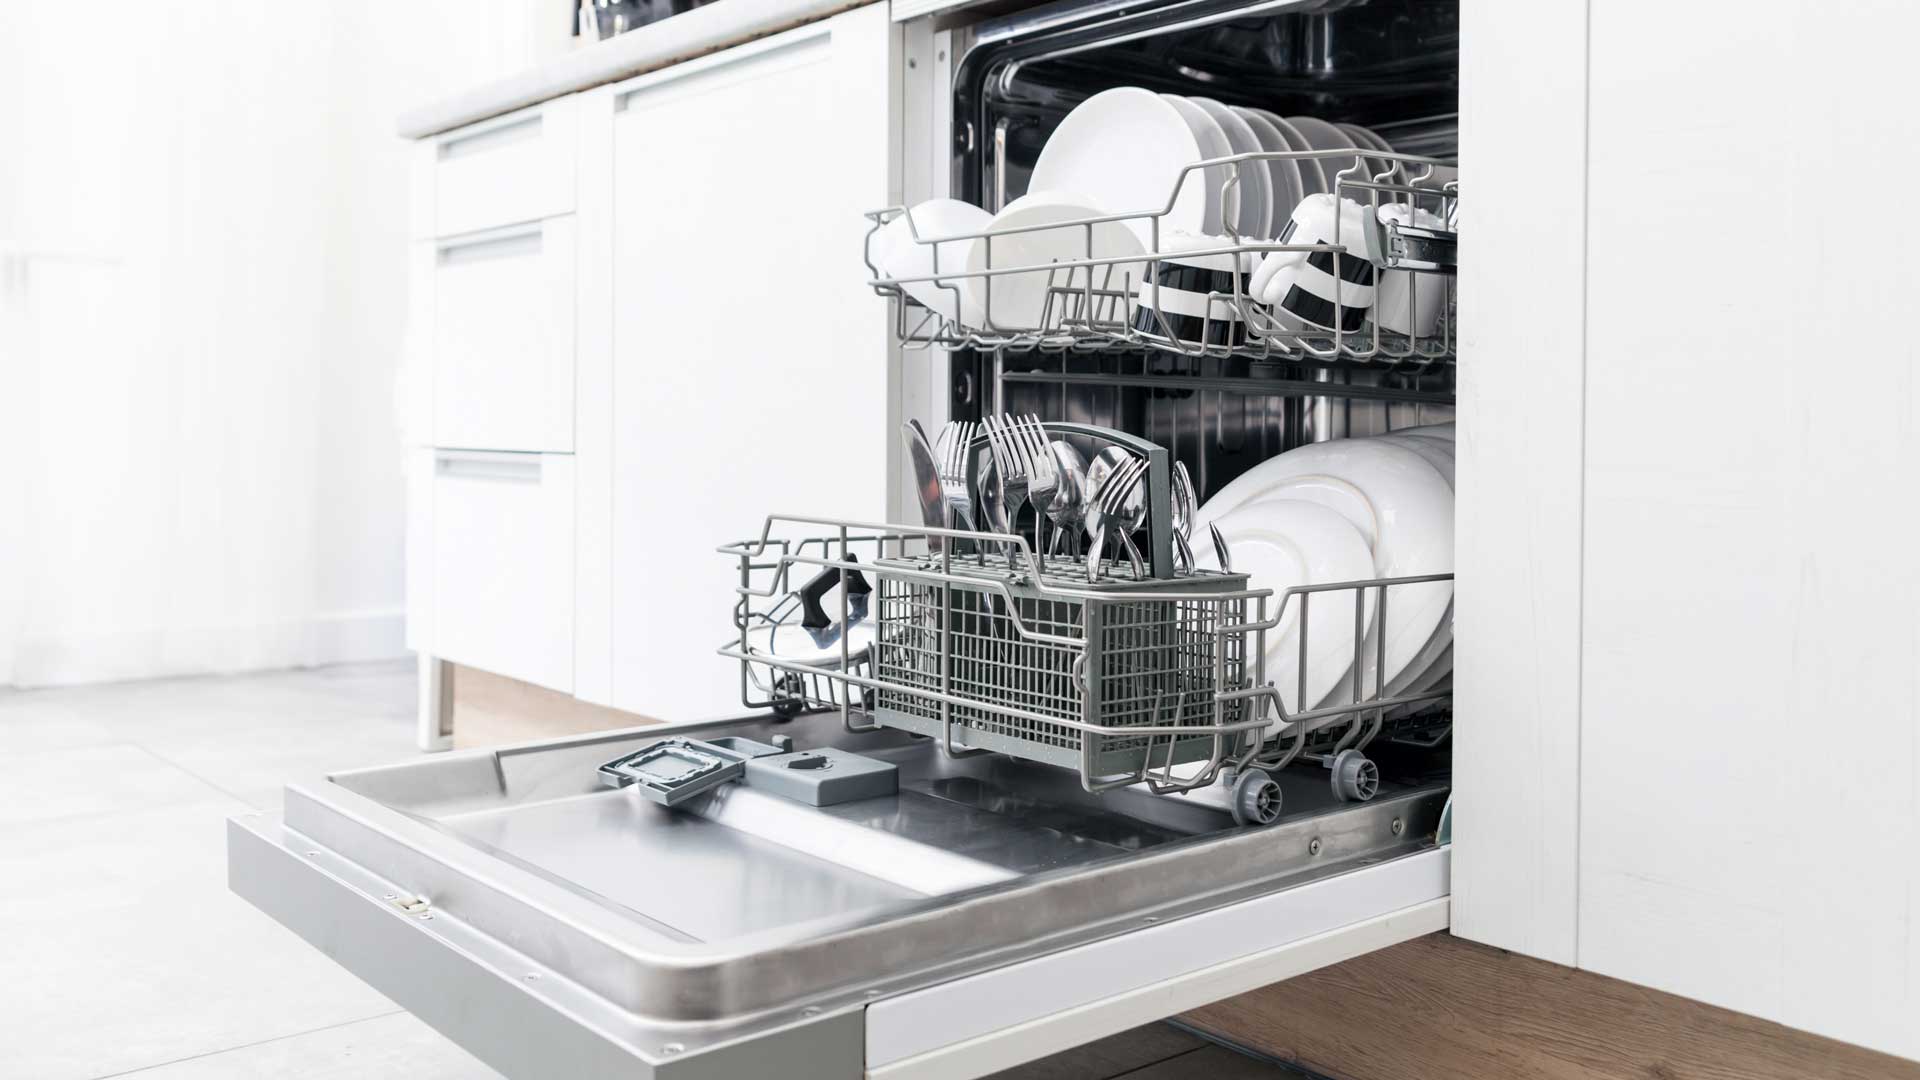 A dishwasher, full of clean dishes